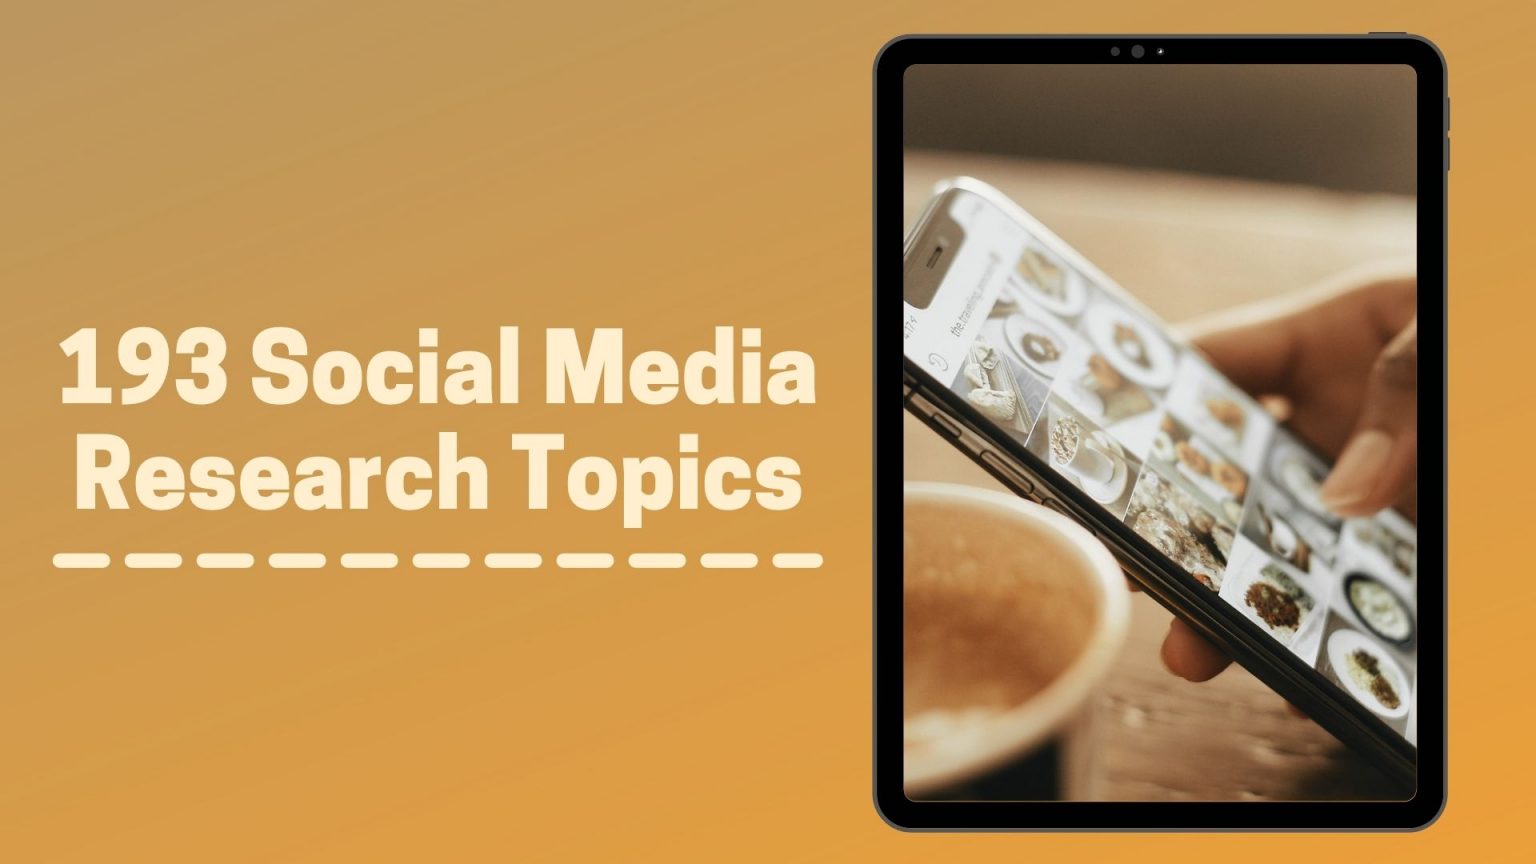 psychology and social media research topics